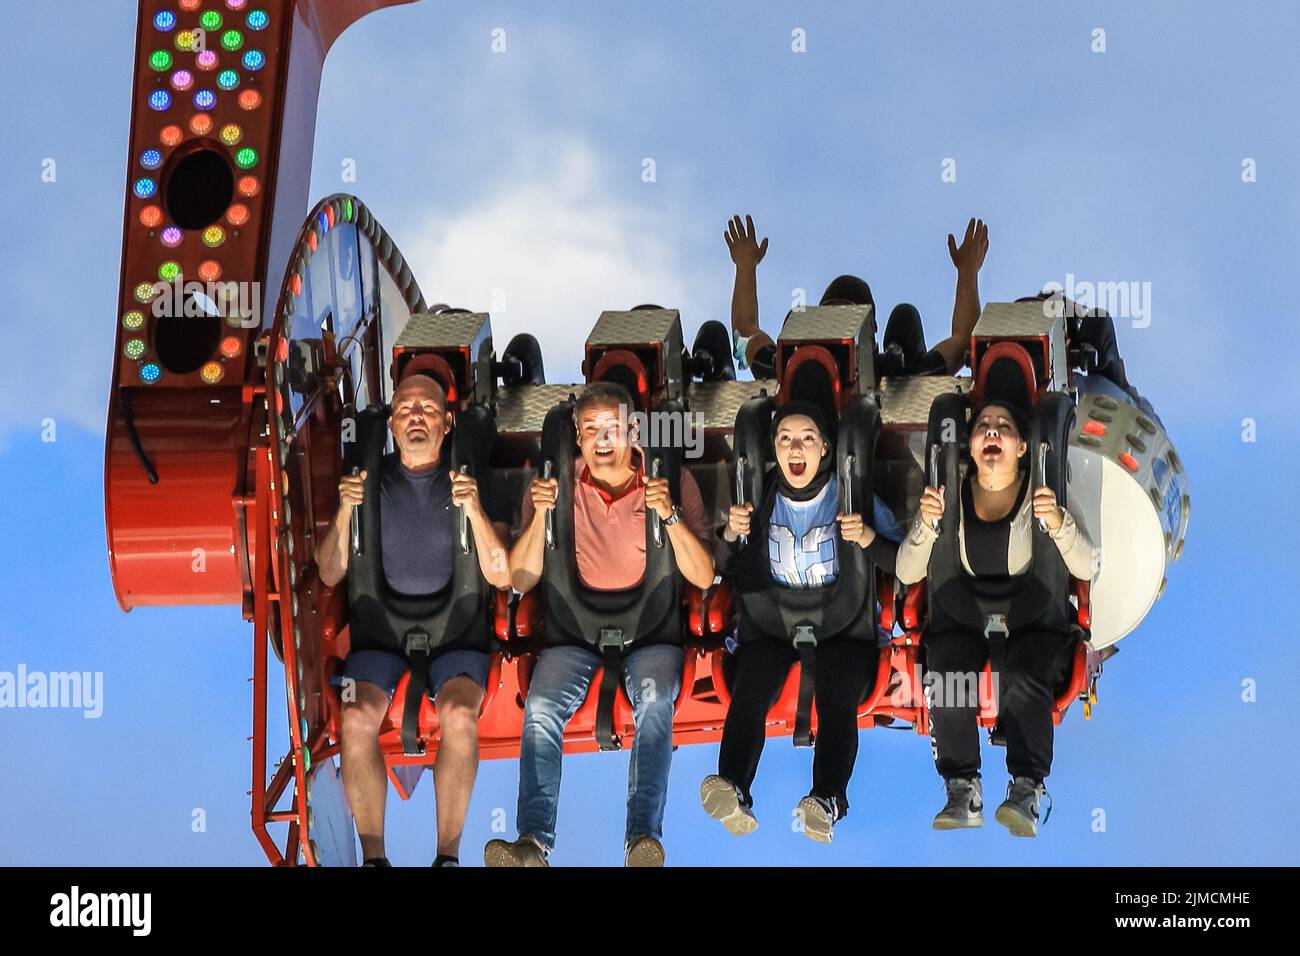 Crange, Herne, NRW, 05th Aug, 2022. People hang suspended in the air on the 55 metre high 'Apollo 13' ride. The official opening day of the 2022 Cranger Kirmes, Germany's 3rd largest funfair and the largest of its kind in NRW, sees thousands of visitors enjoying the carousels, roller coasters, beer halls, food stalls and other attractions. The popular fair, which was paused during the pandemic, regularly attracts more than 4m visitors during its 10 day run and has been established for decades in its current form, with the fair itself dating back to the early 18th century at Crange. Credit: Ima Stock Photo